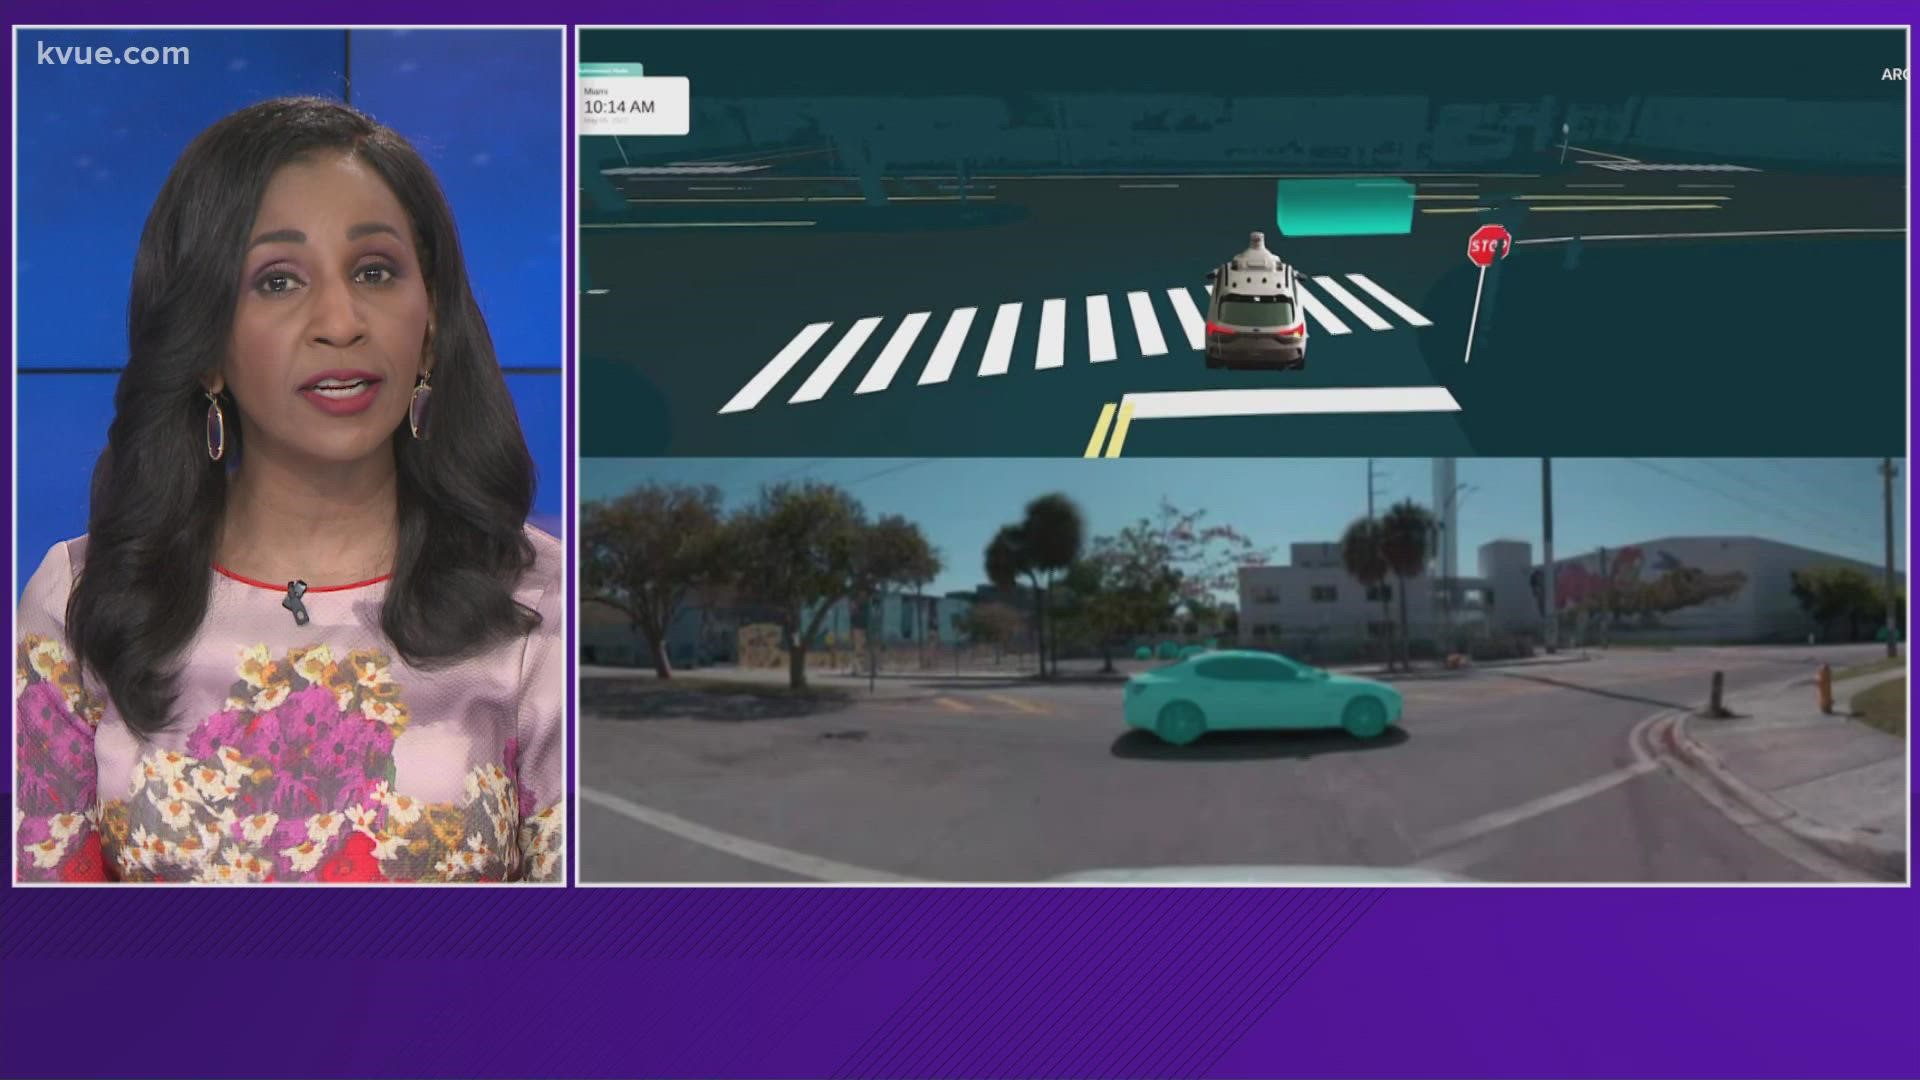 A company is taking backup safety drivers out of robotaxis in Texas as testing continues.